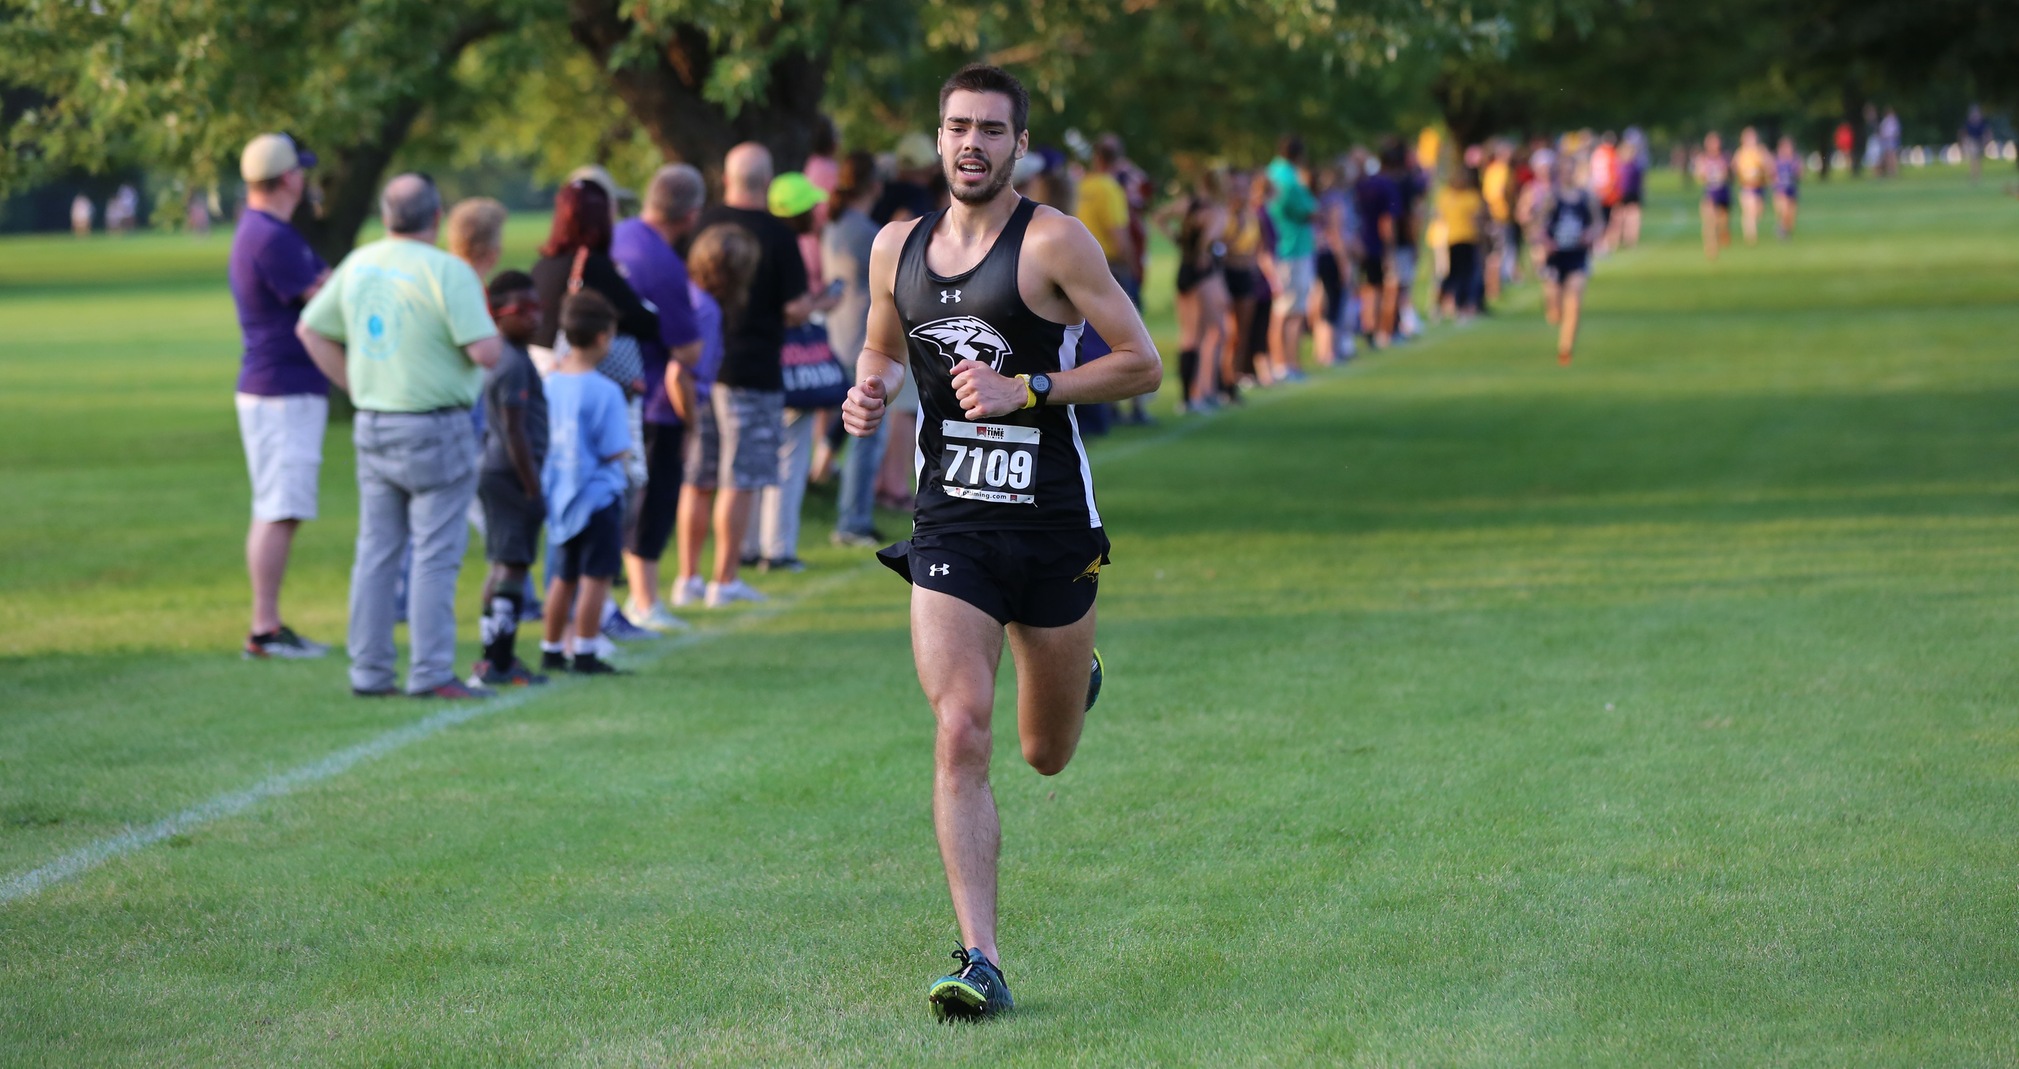 Andrew George paced UW-Oshkosh at the Titan Fall Classic with his seventh-place finish.